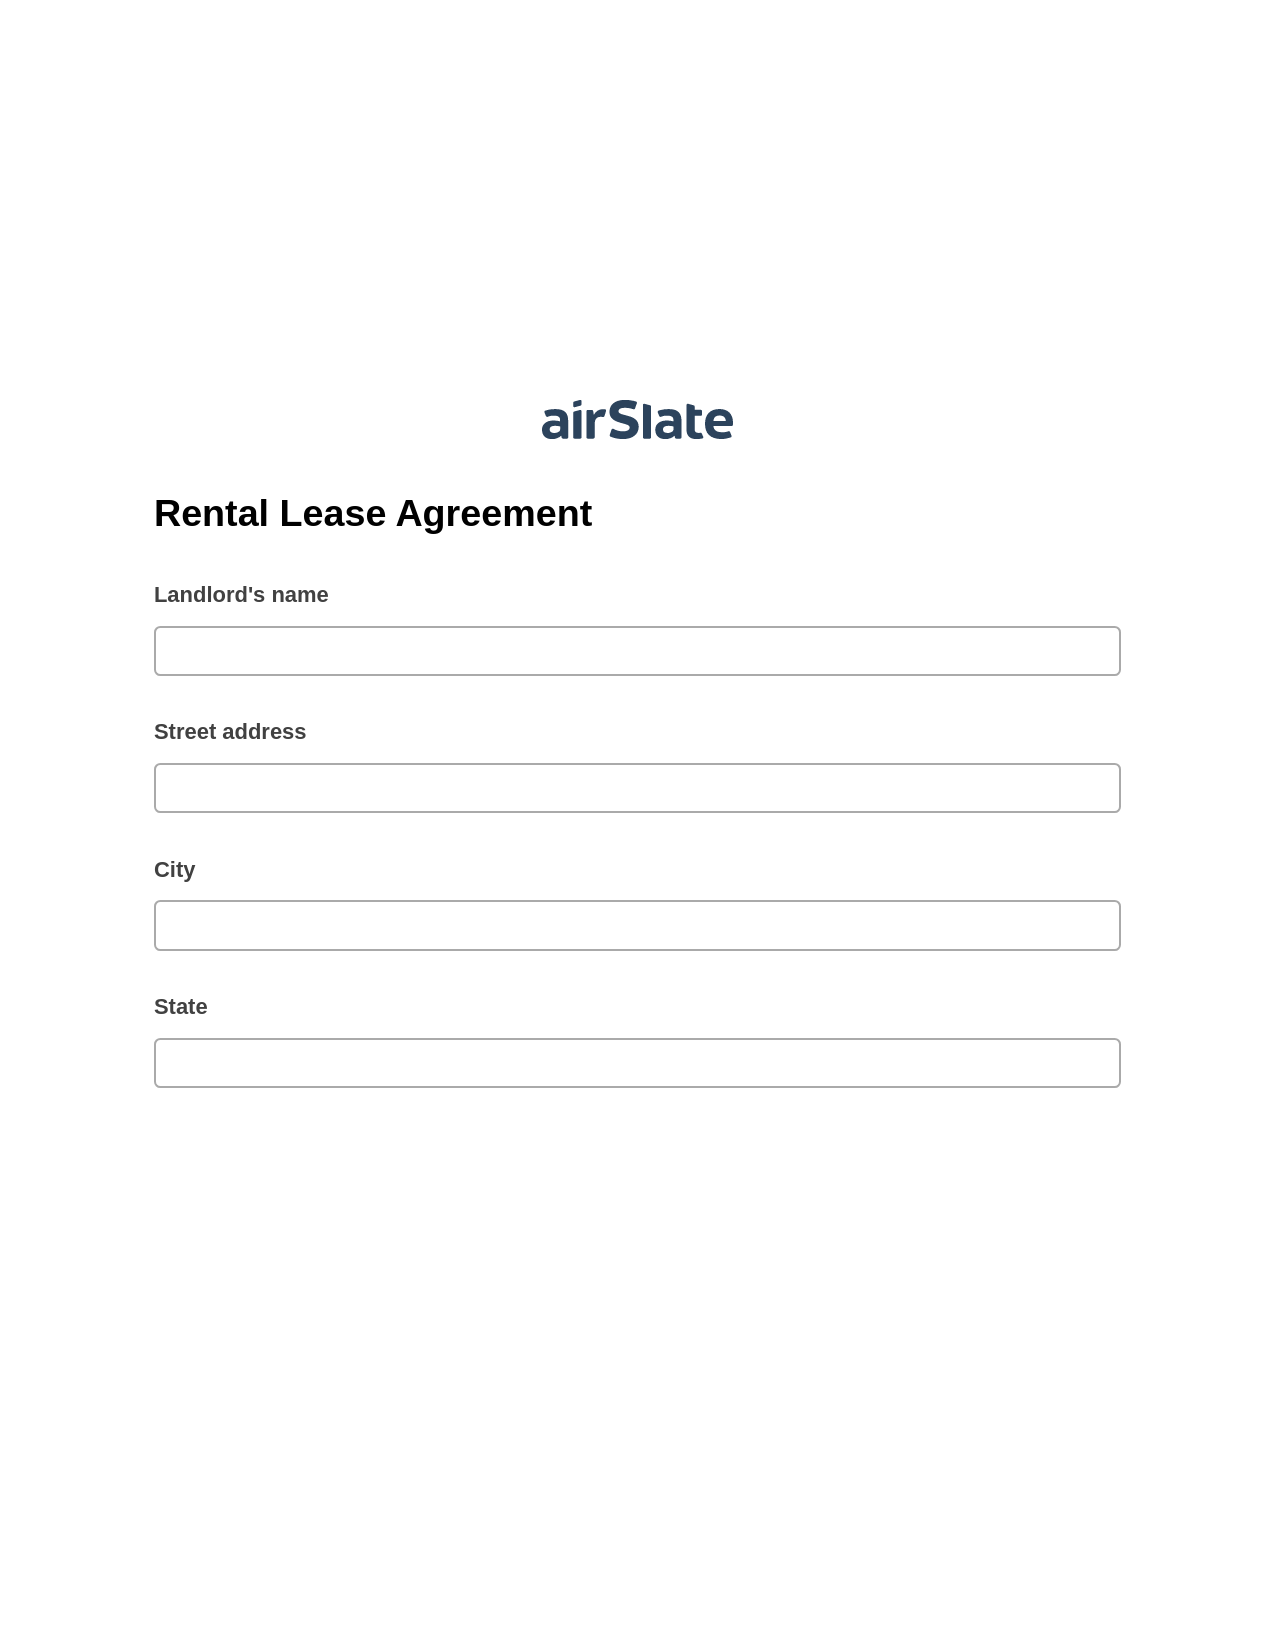 Multirole Rental Lease Agreement Pre-fill from Excel Spreadsheet Dropdown Options Bot, Create slate addon, Export to Salesforce Bot